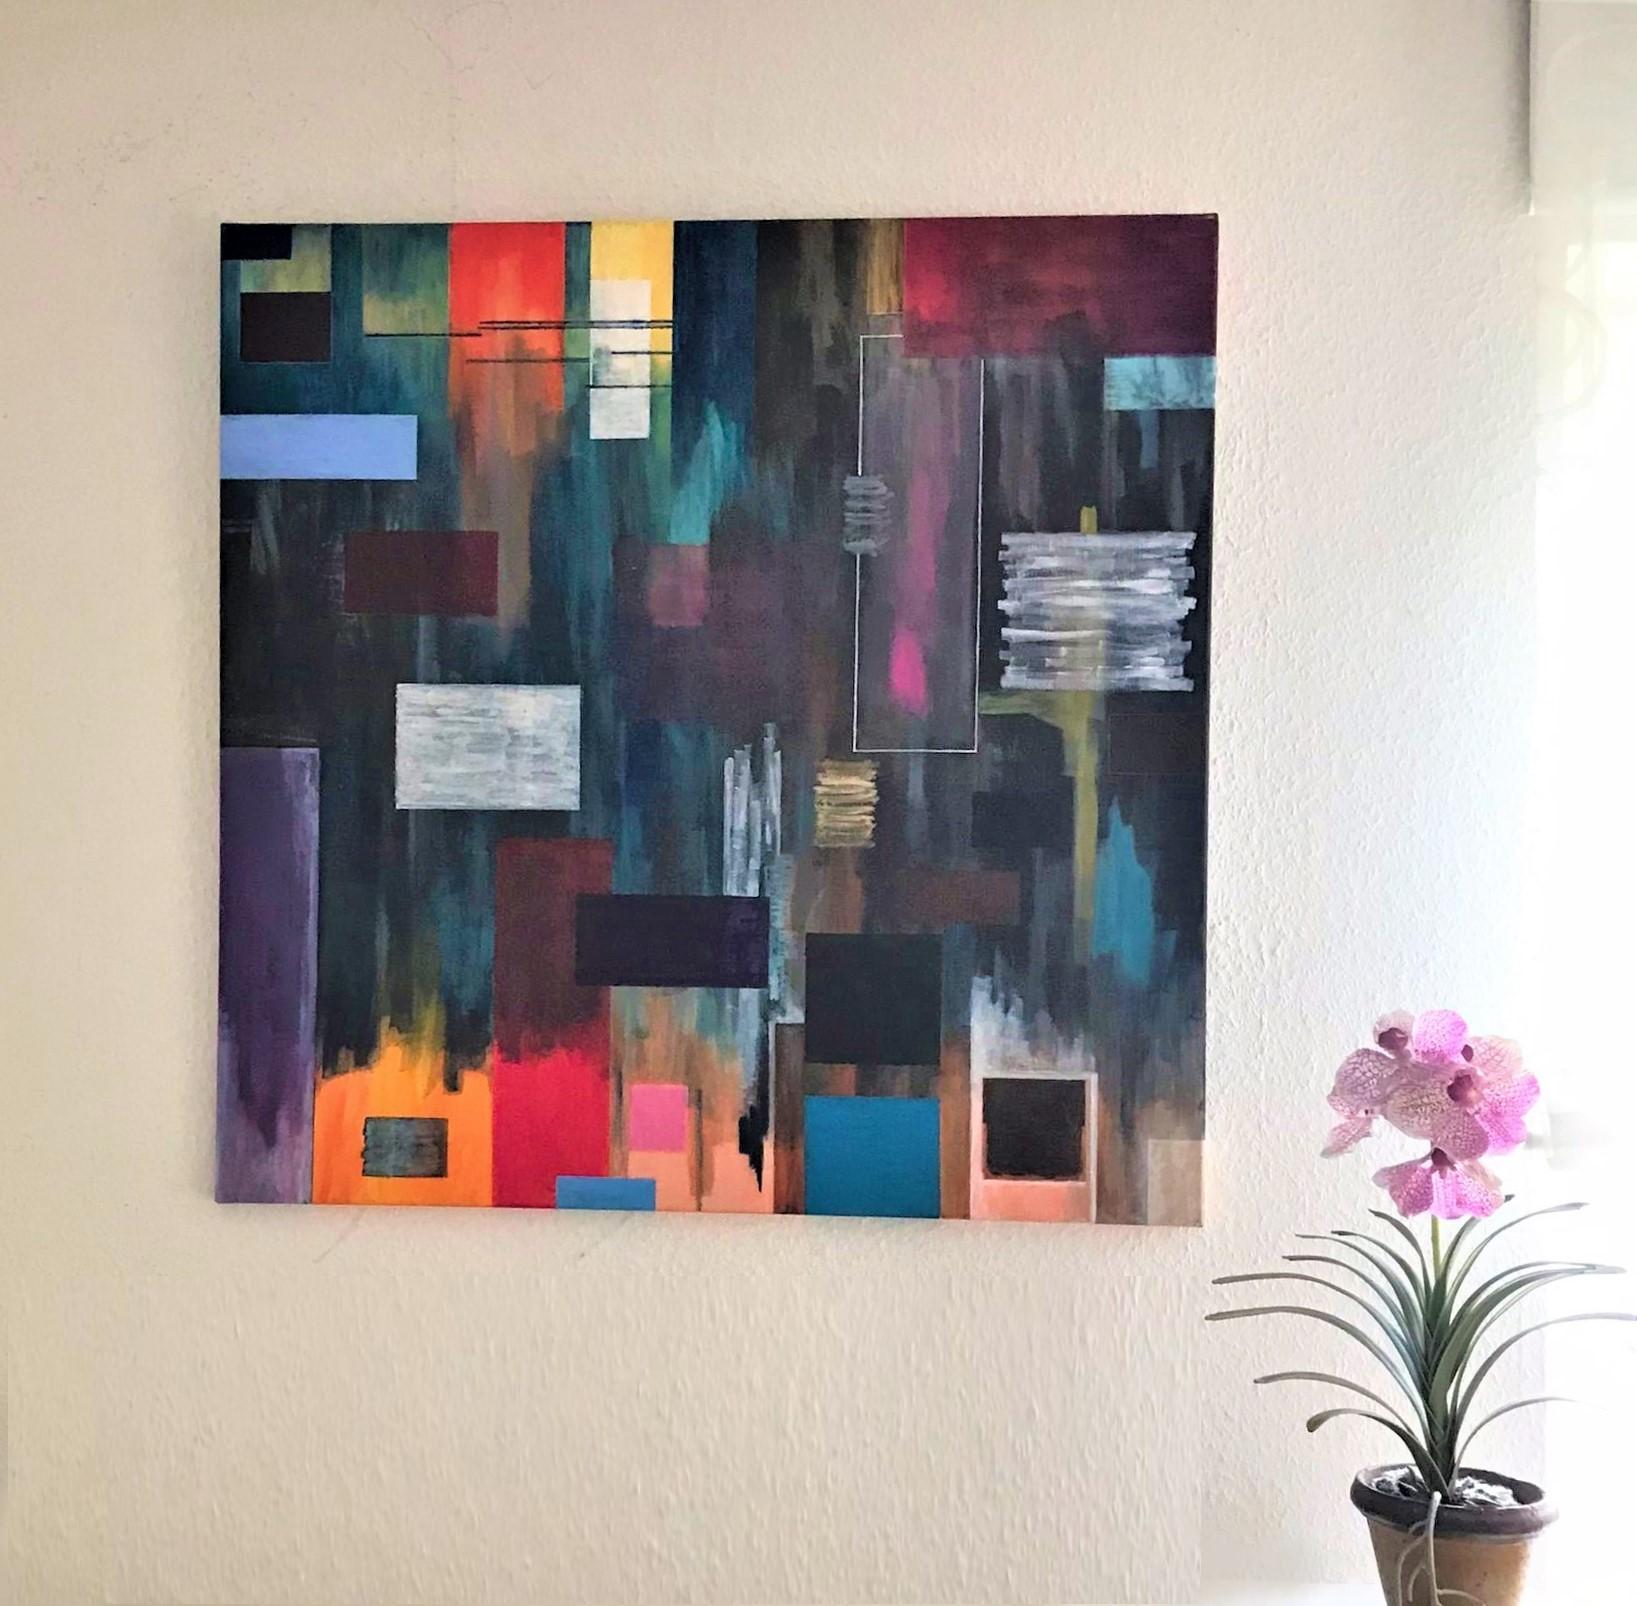 Artist: Detlef E. Aderhold

Medium: Mixed Media on Canvas

Edition: Original Abstract Painting in Turquoise, Green, Yellow, Blue, Red and Black


About the Artist:

Detlef E. Aderhold is a contemporary abstract painter from Germany.

